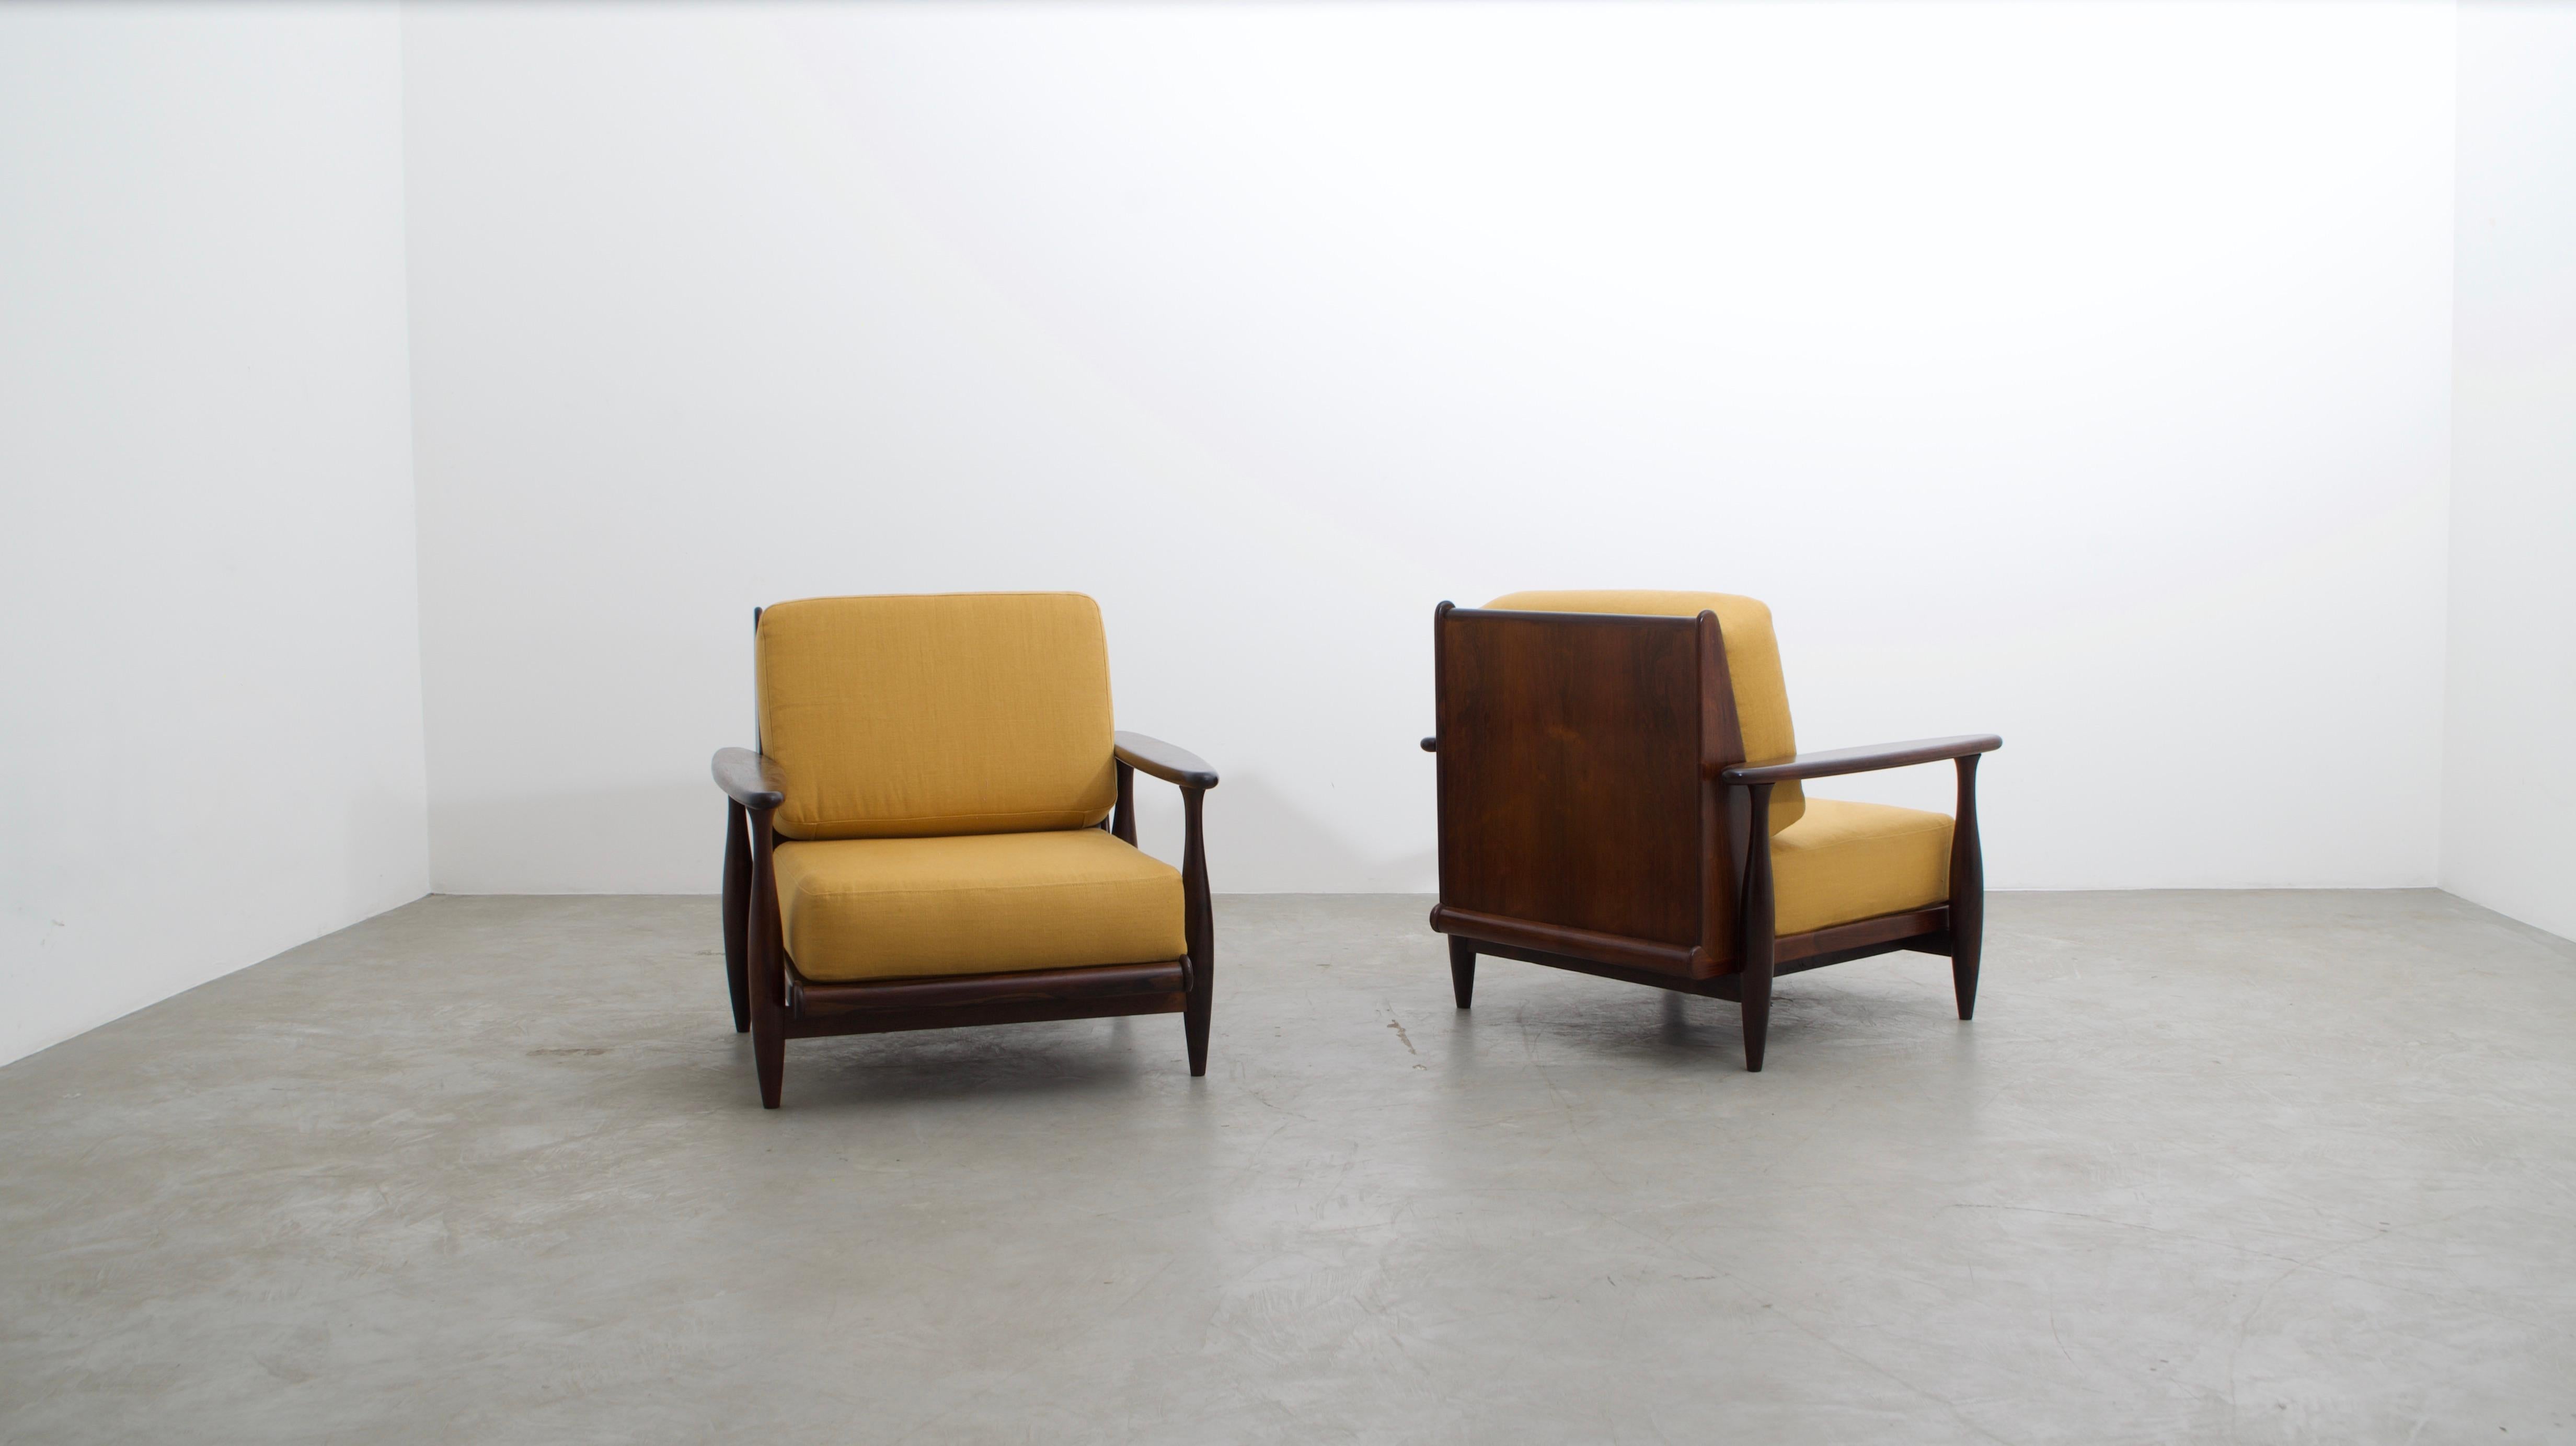 Pair of Lounge chairs in Wood and Fabric, Liceu de Artes e Ofícios, 1960's, Brazilian mid-century design

This beautiful pair of armchairs was made of Brazilian hardwood in the 60s, by Liceu de Artes e Ofícios. The extremely elegant curved lines